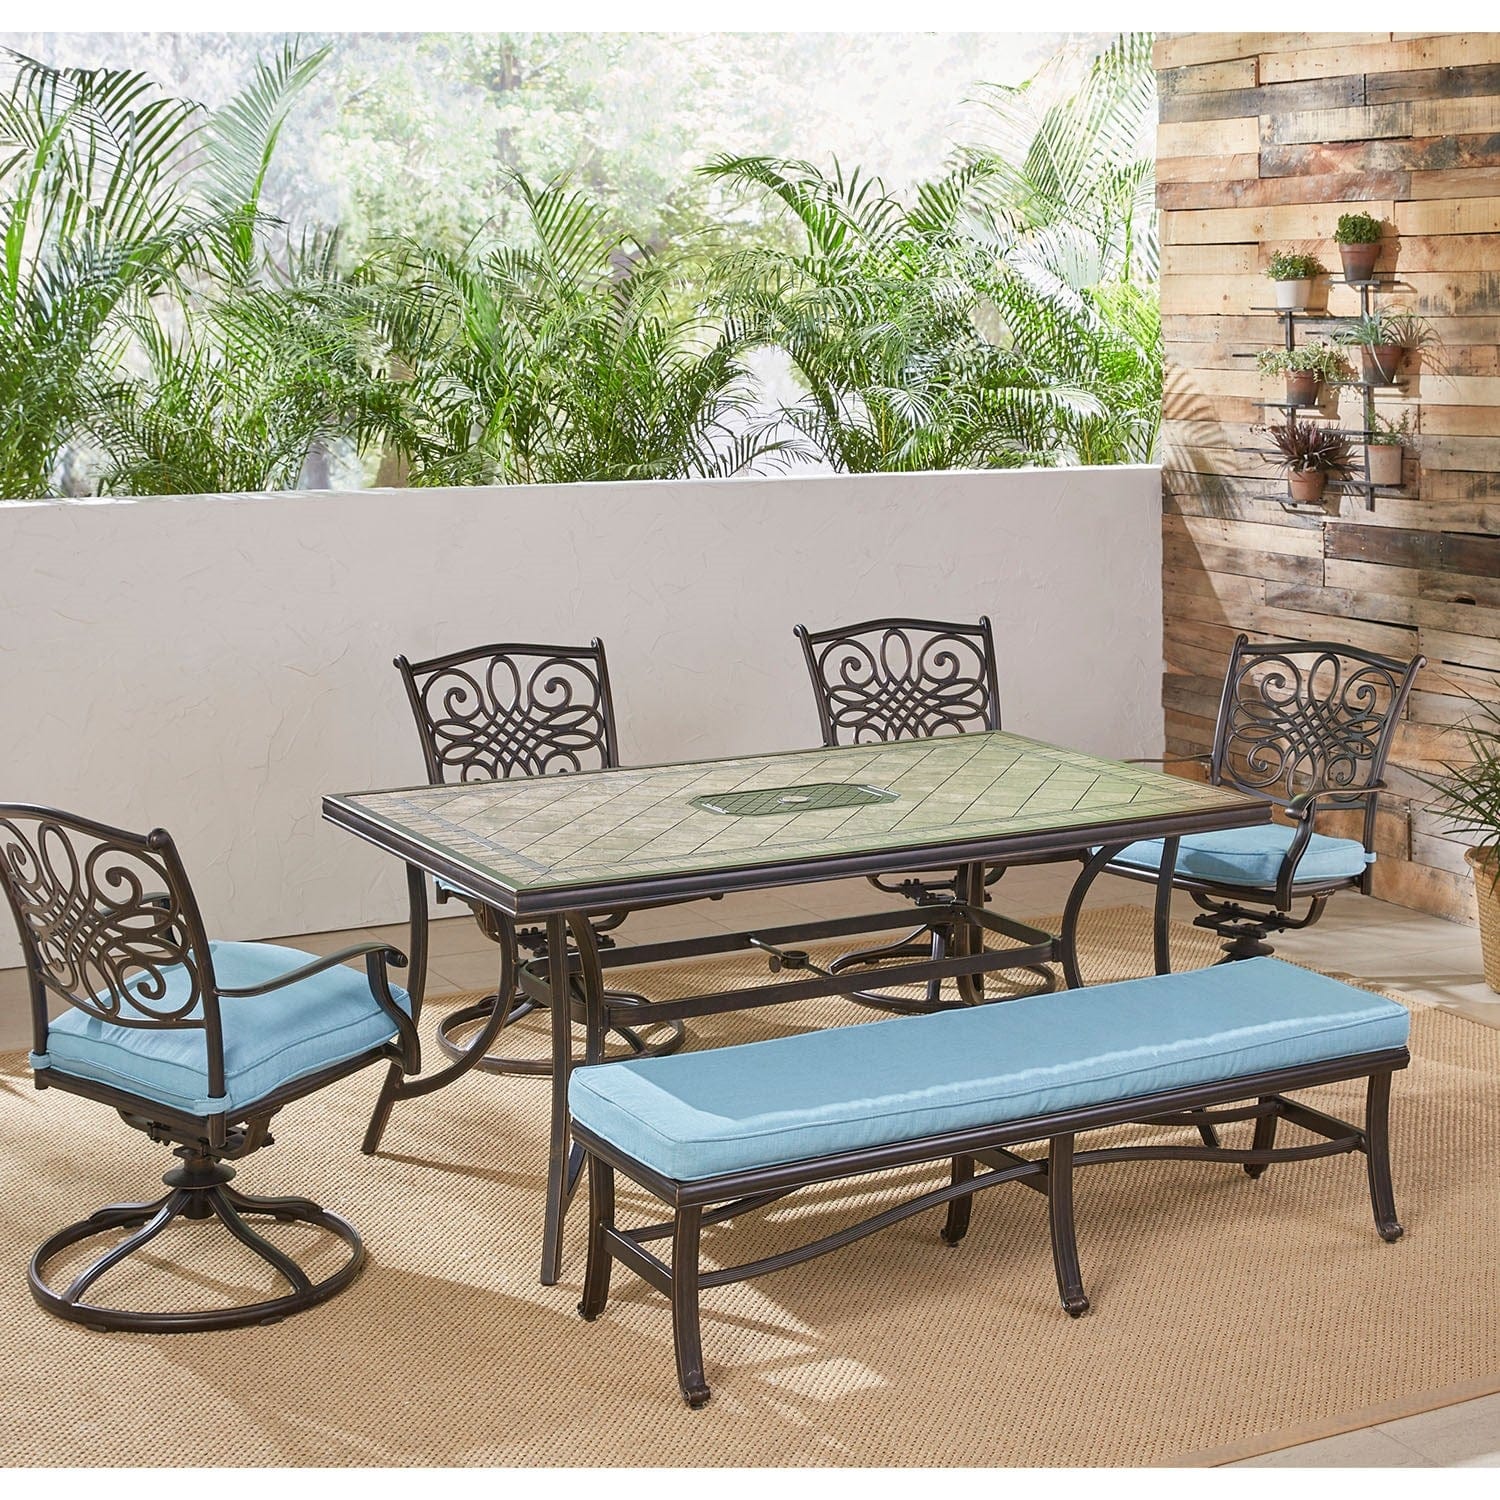 Hanover Outdoor Dining Set Hanover - Monaco 6-Piece Dining Set in Blue with Four Swivel Rockers, a Cushioned Bench, and a 40" x 68" Tile-Top Table | MONDN6PCSW4BN-BLU